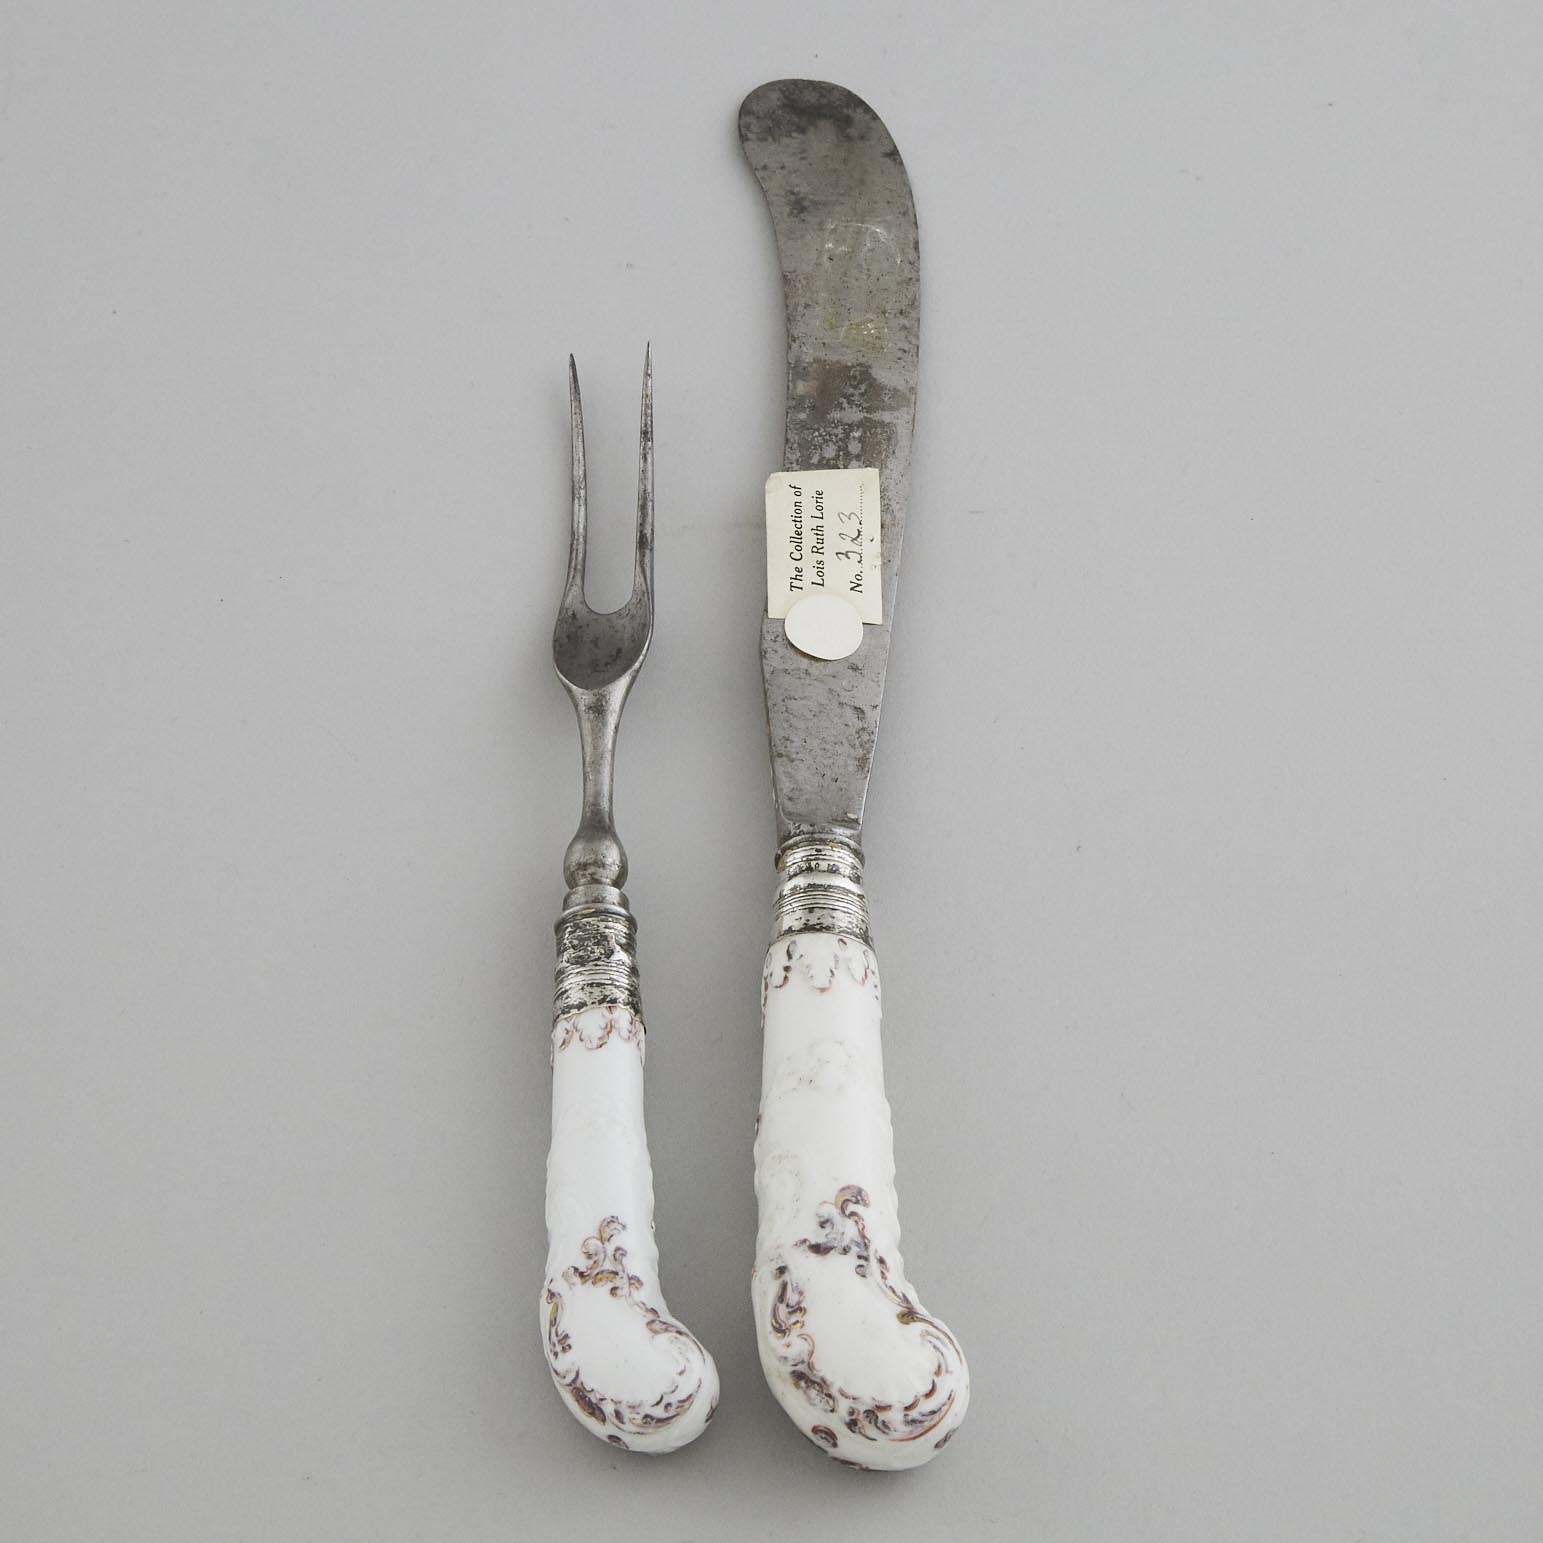 Pair of Bow Moulded and Painted Pistol Shaped Knife and Fork Handles, c.1755